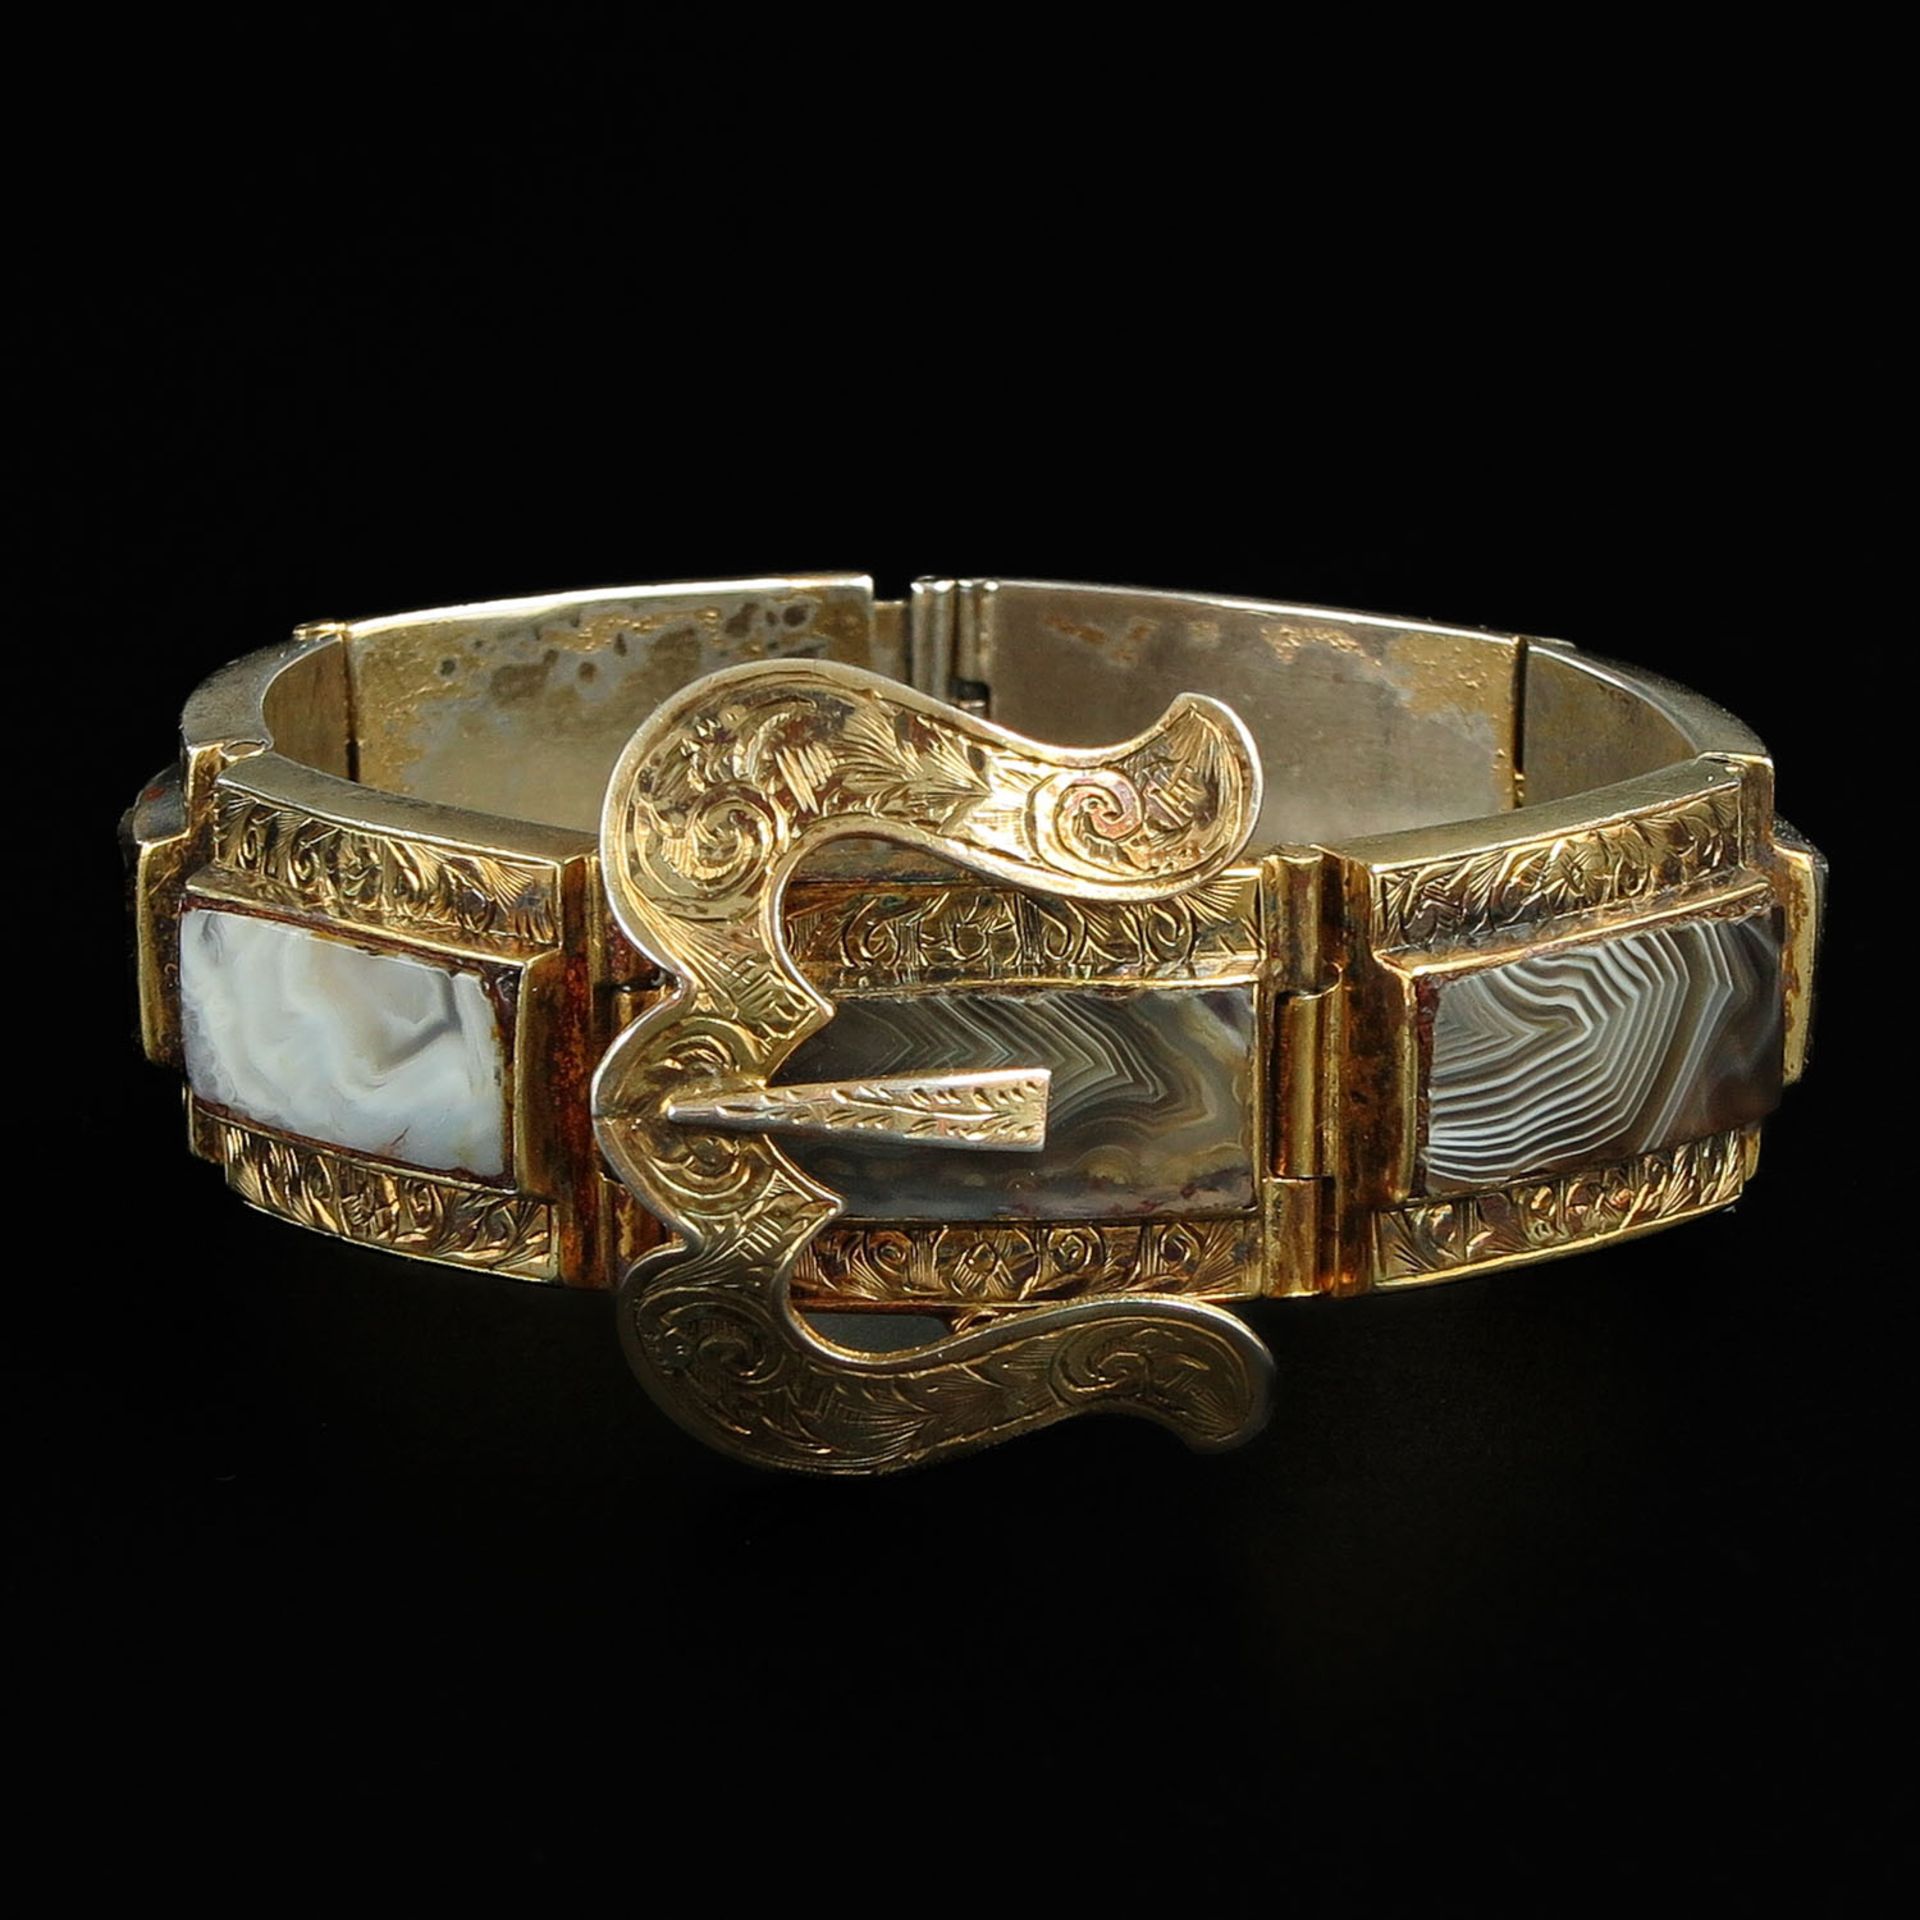 A Bracelet in the Form of a Belt